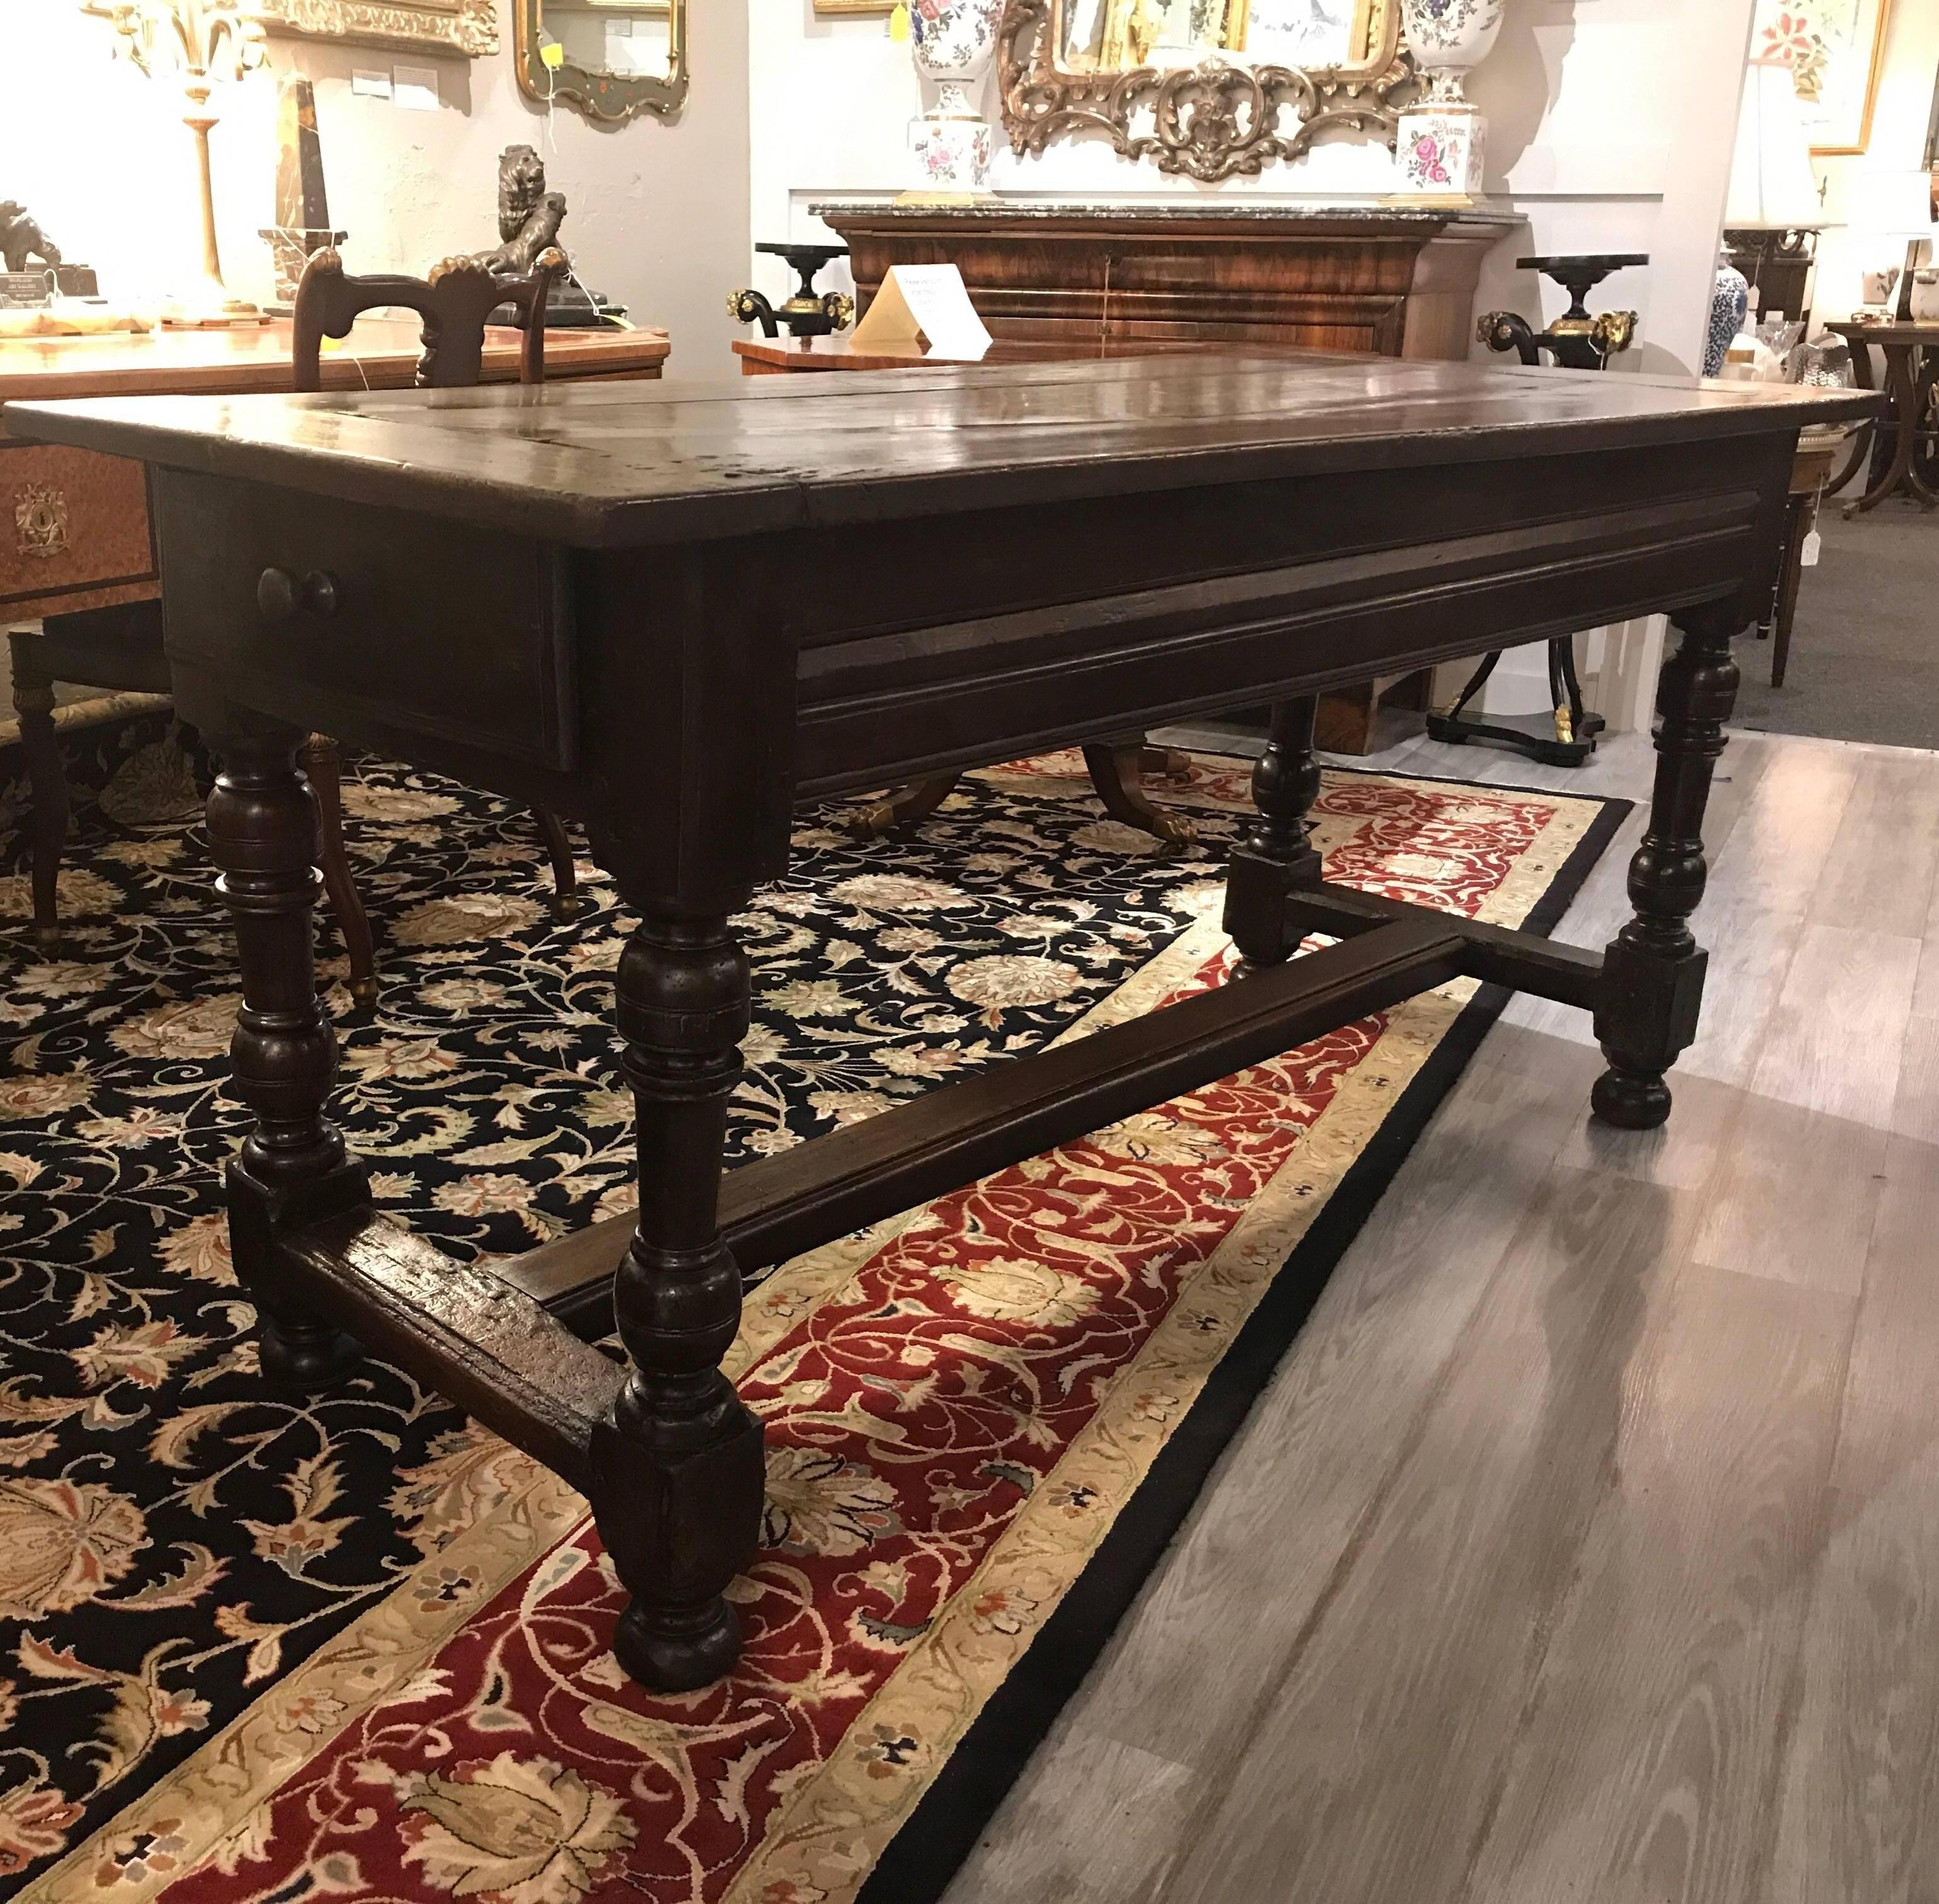 Handsome solid walnut late 18th-early 19th century tavern table, England, circa 1800. The table is in well carved for condition with a recent polish. The warm aged patination that can only come with hundreds of years of age. The table has two